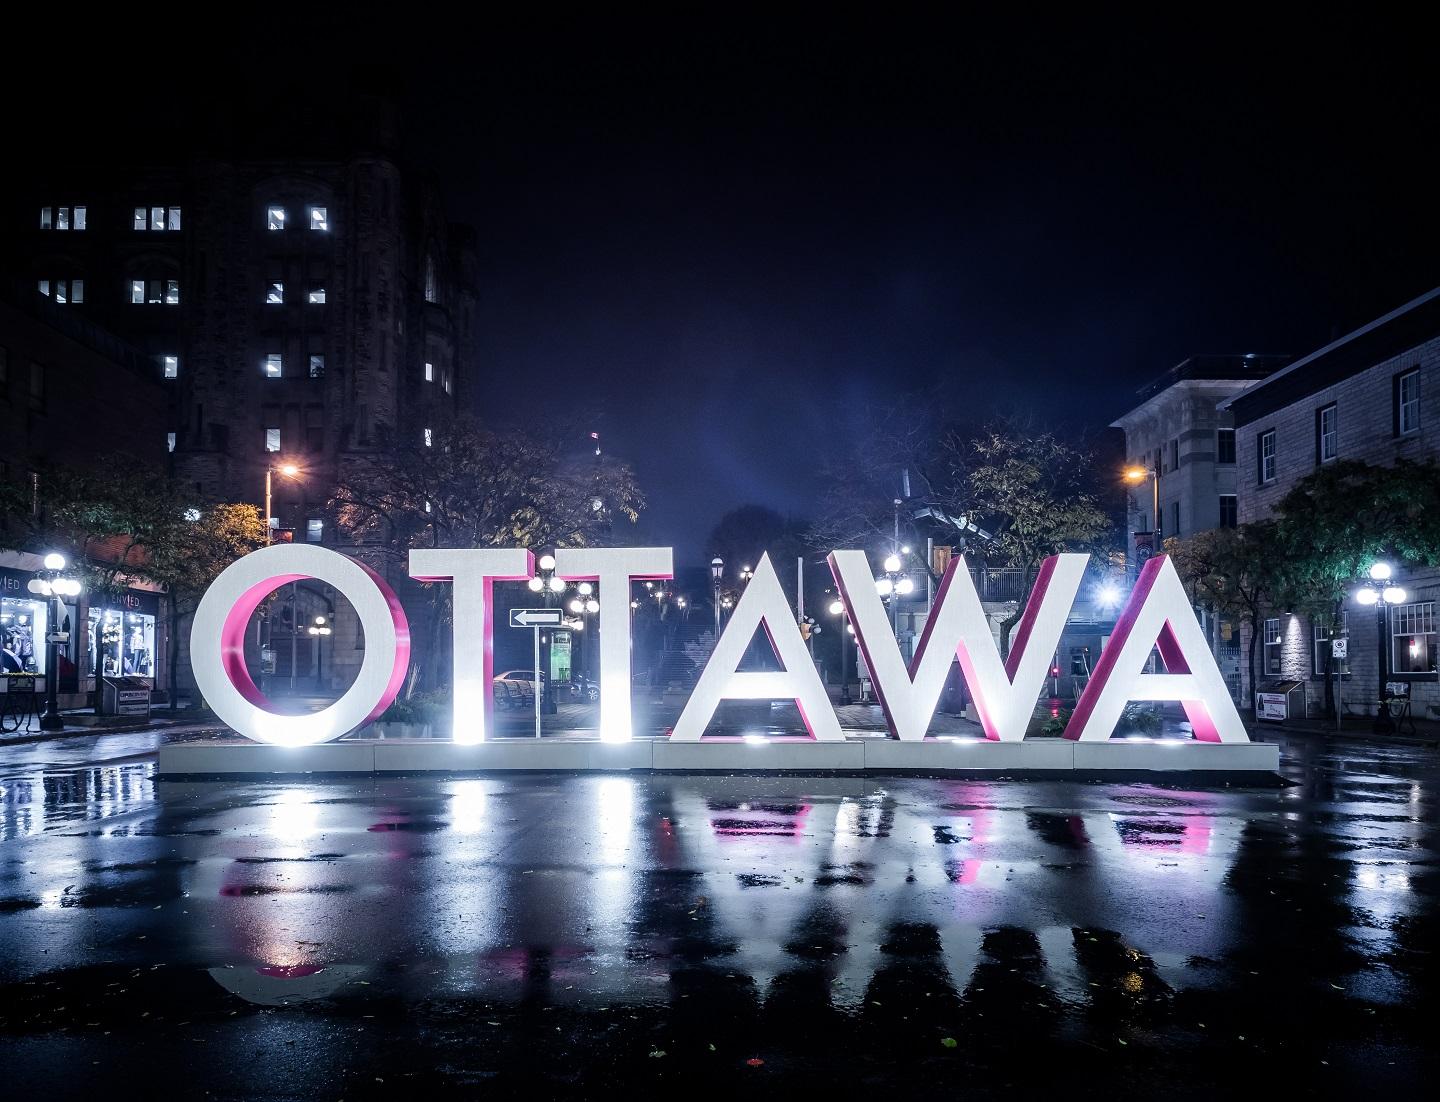 The "Ottawa" sign in Inspiration Village at the ByWard Market